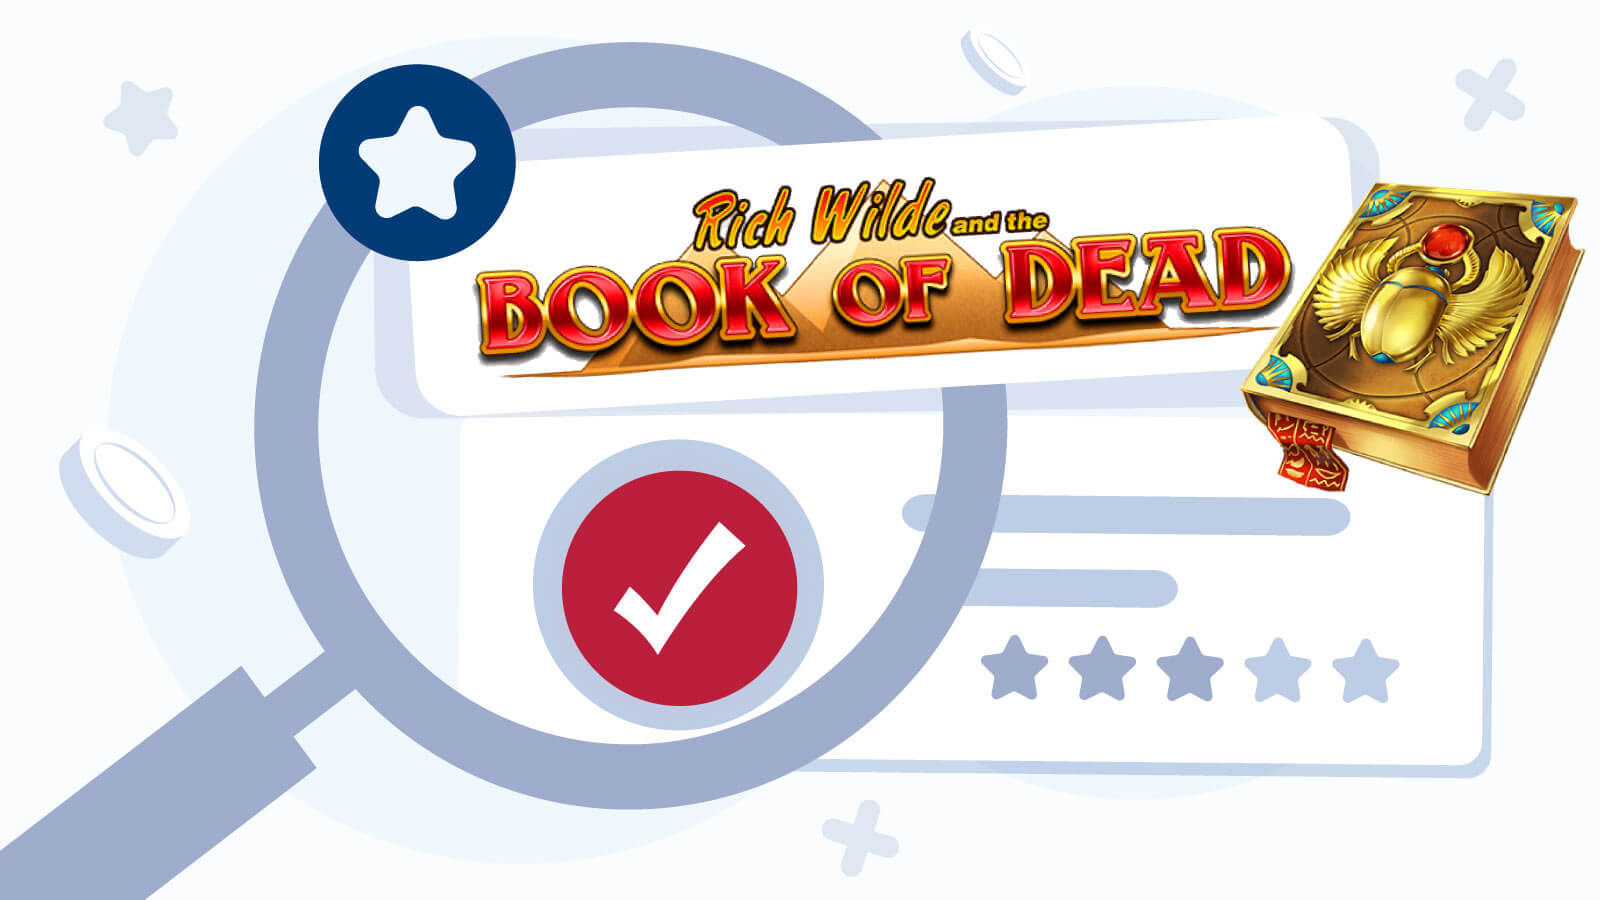 King’s-Review-of-Book-of-Dead-Slot